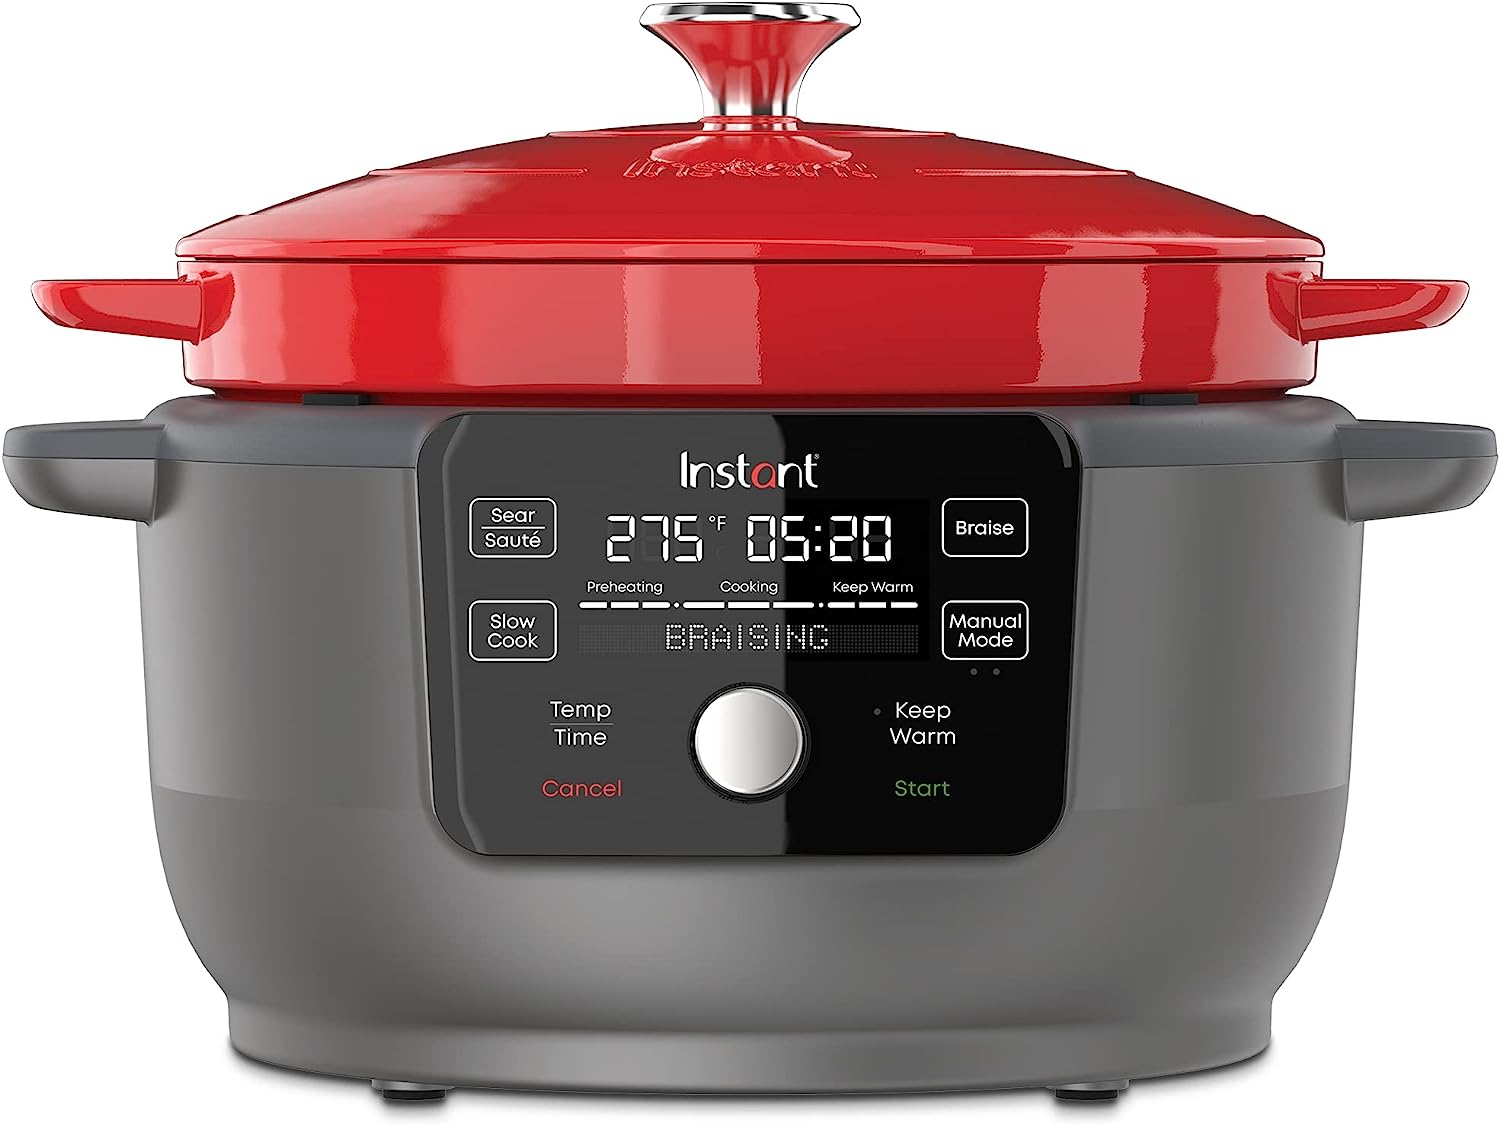 Instant Electric Round Dutch Oven, 6-Quart 1500W, From the Makers of Instant Pot, 5-in-1